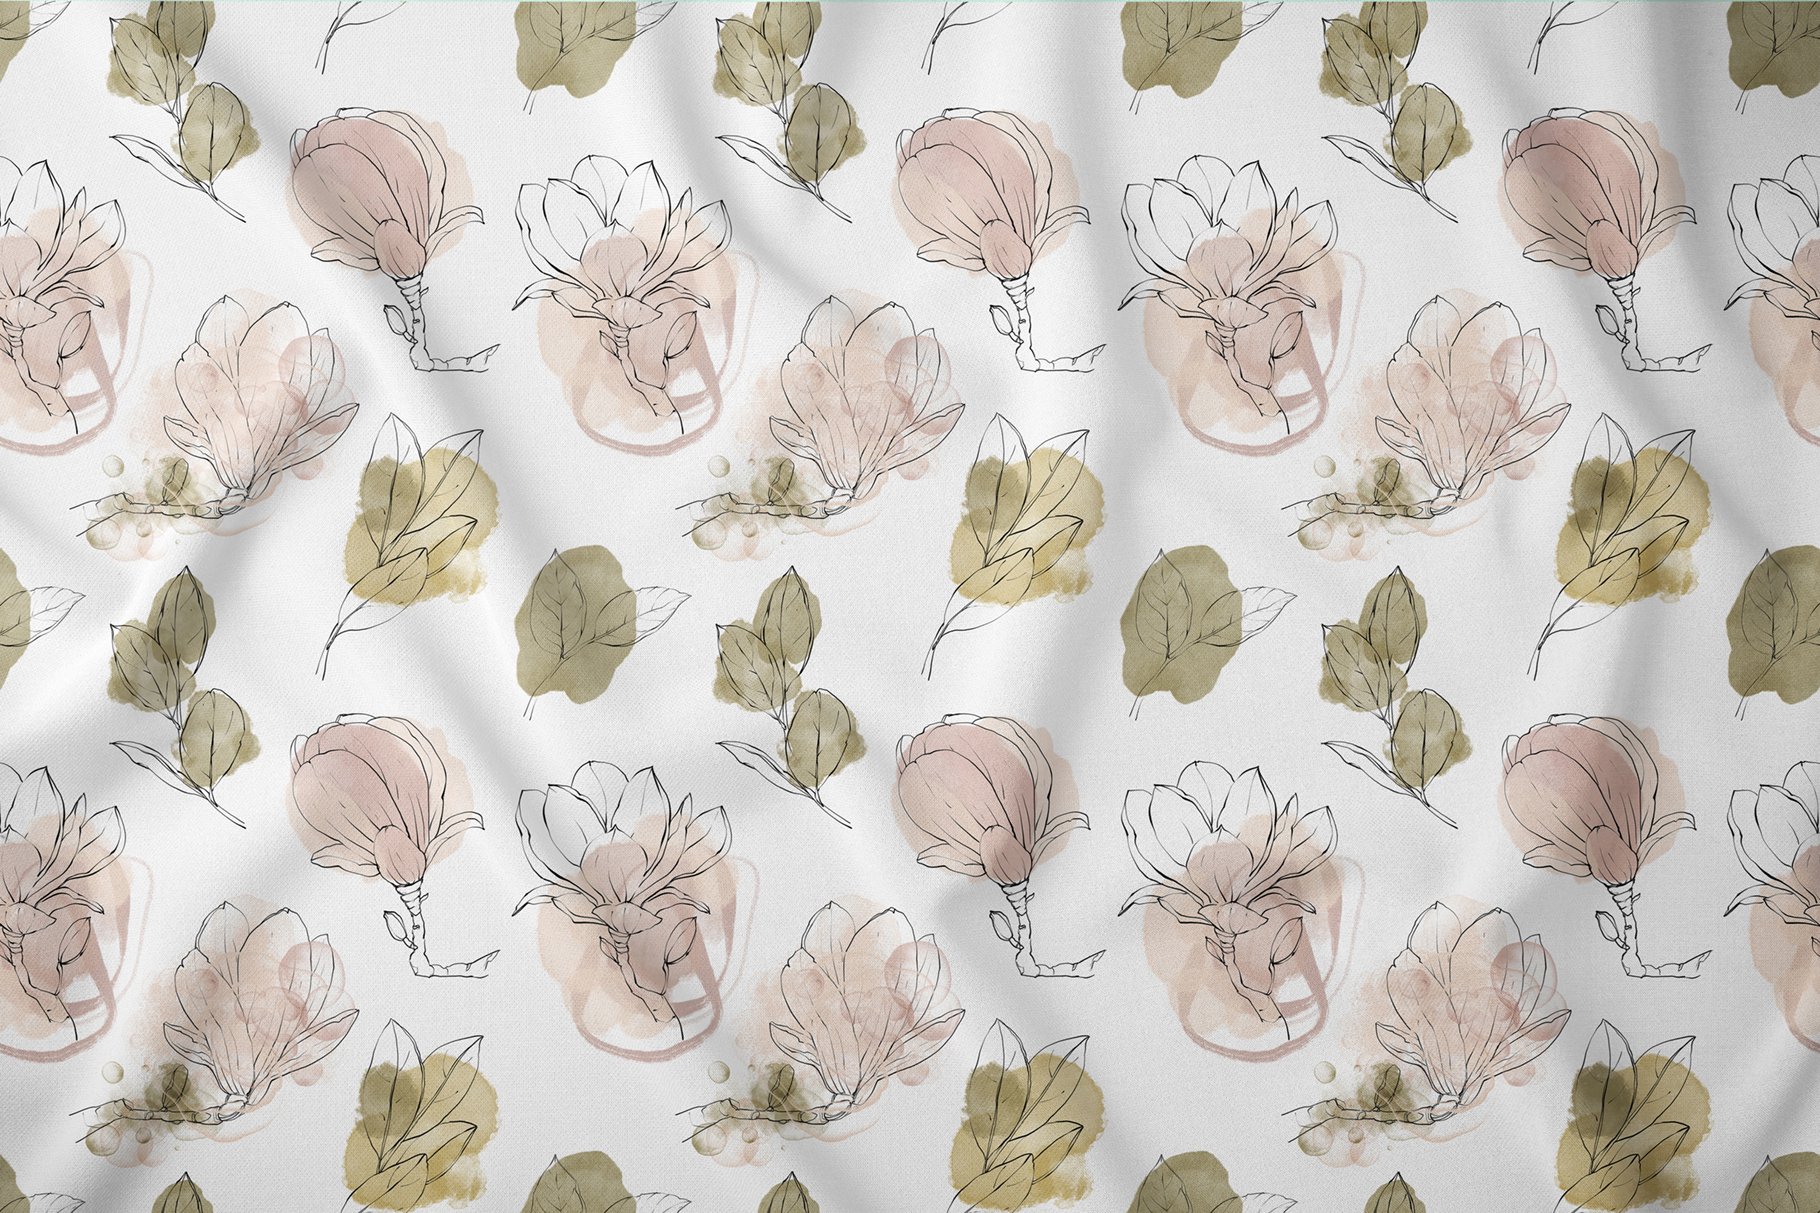 Magnolia Floral Line Art and Abstract Collection